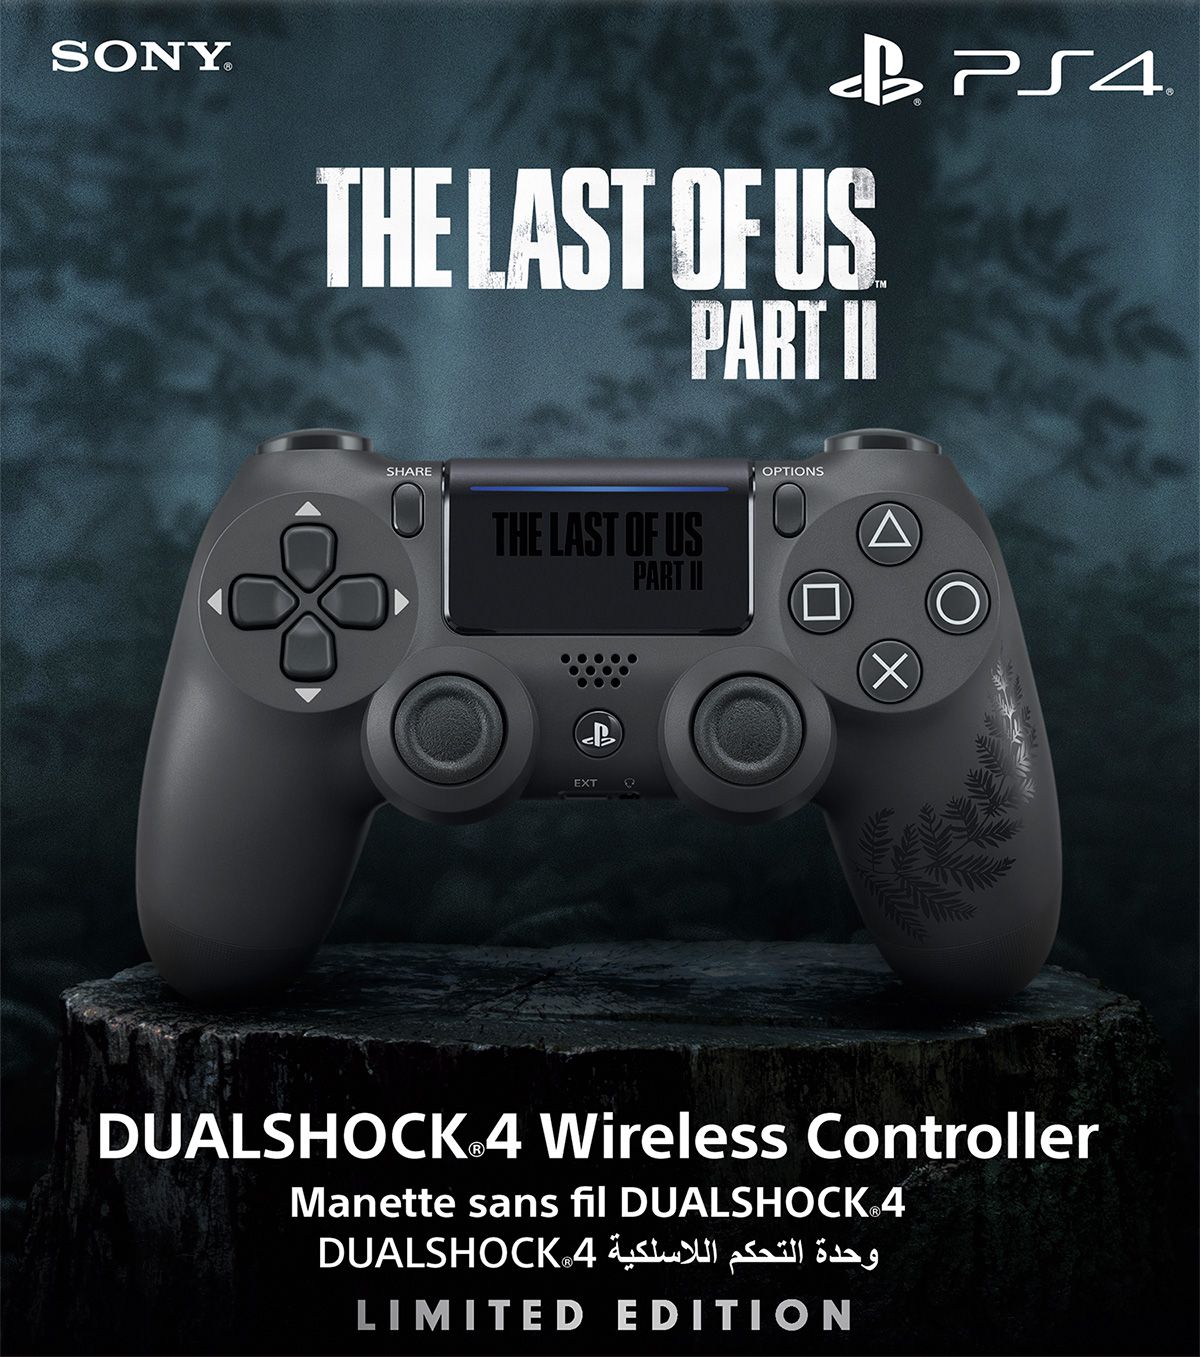 ps4 the last of us controller